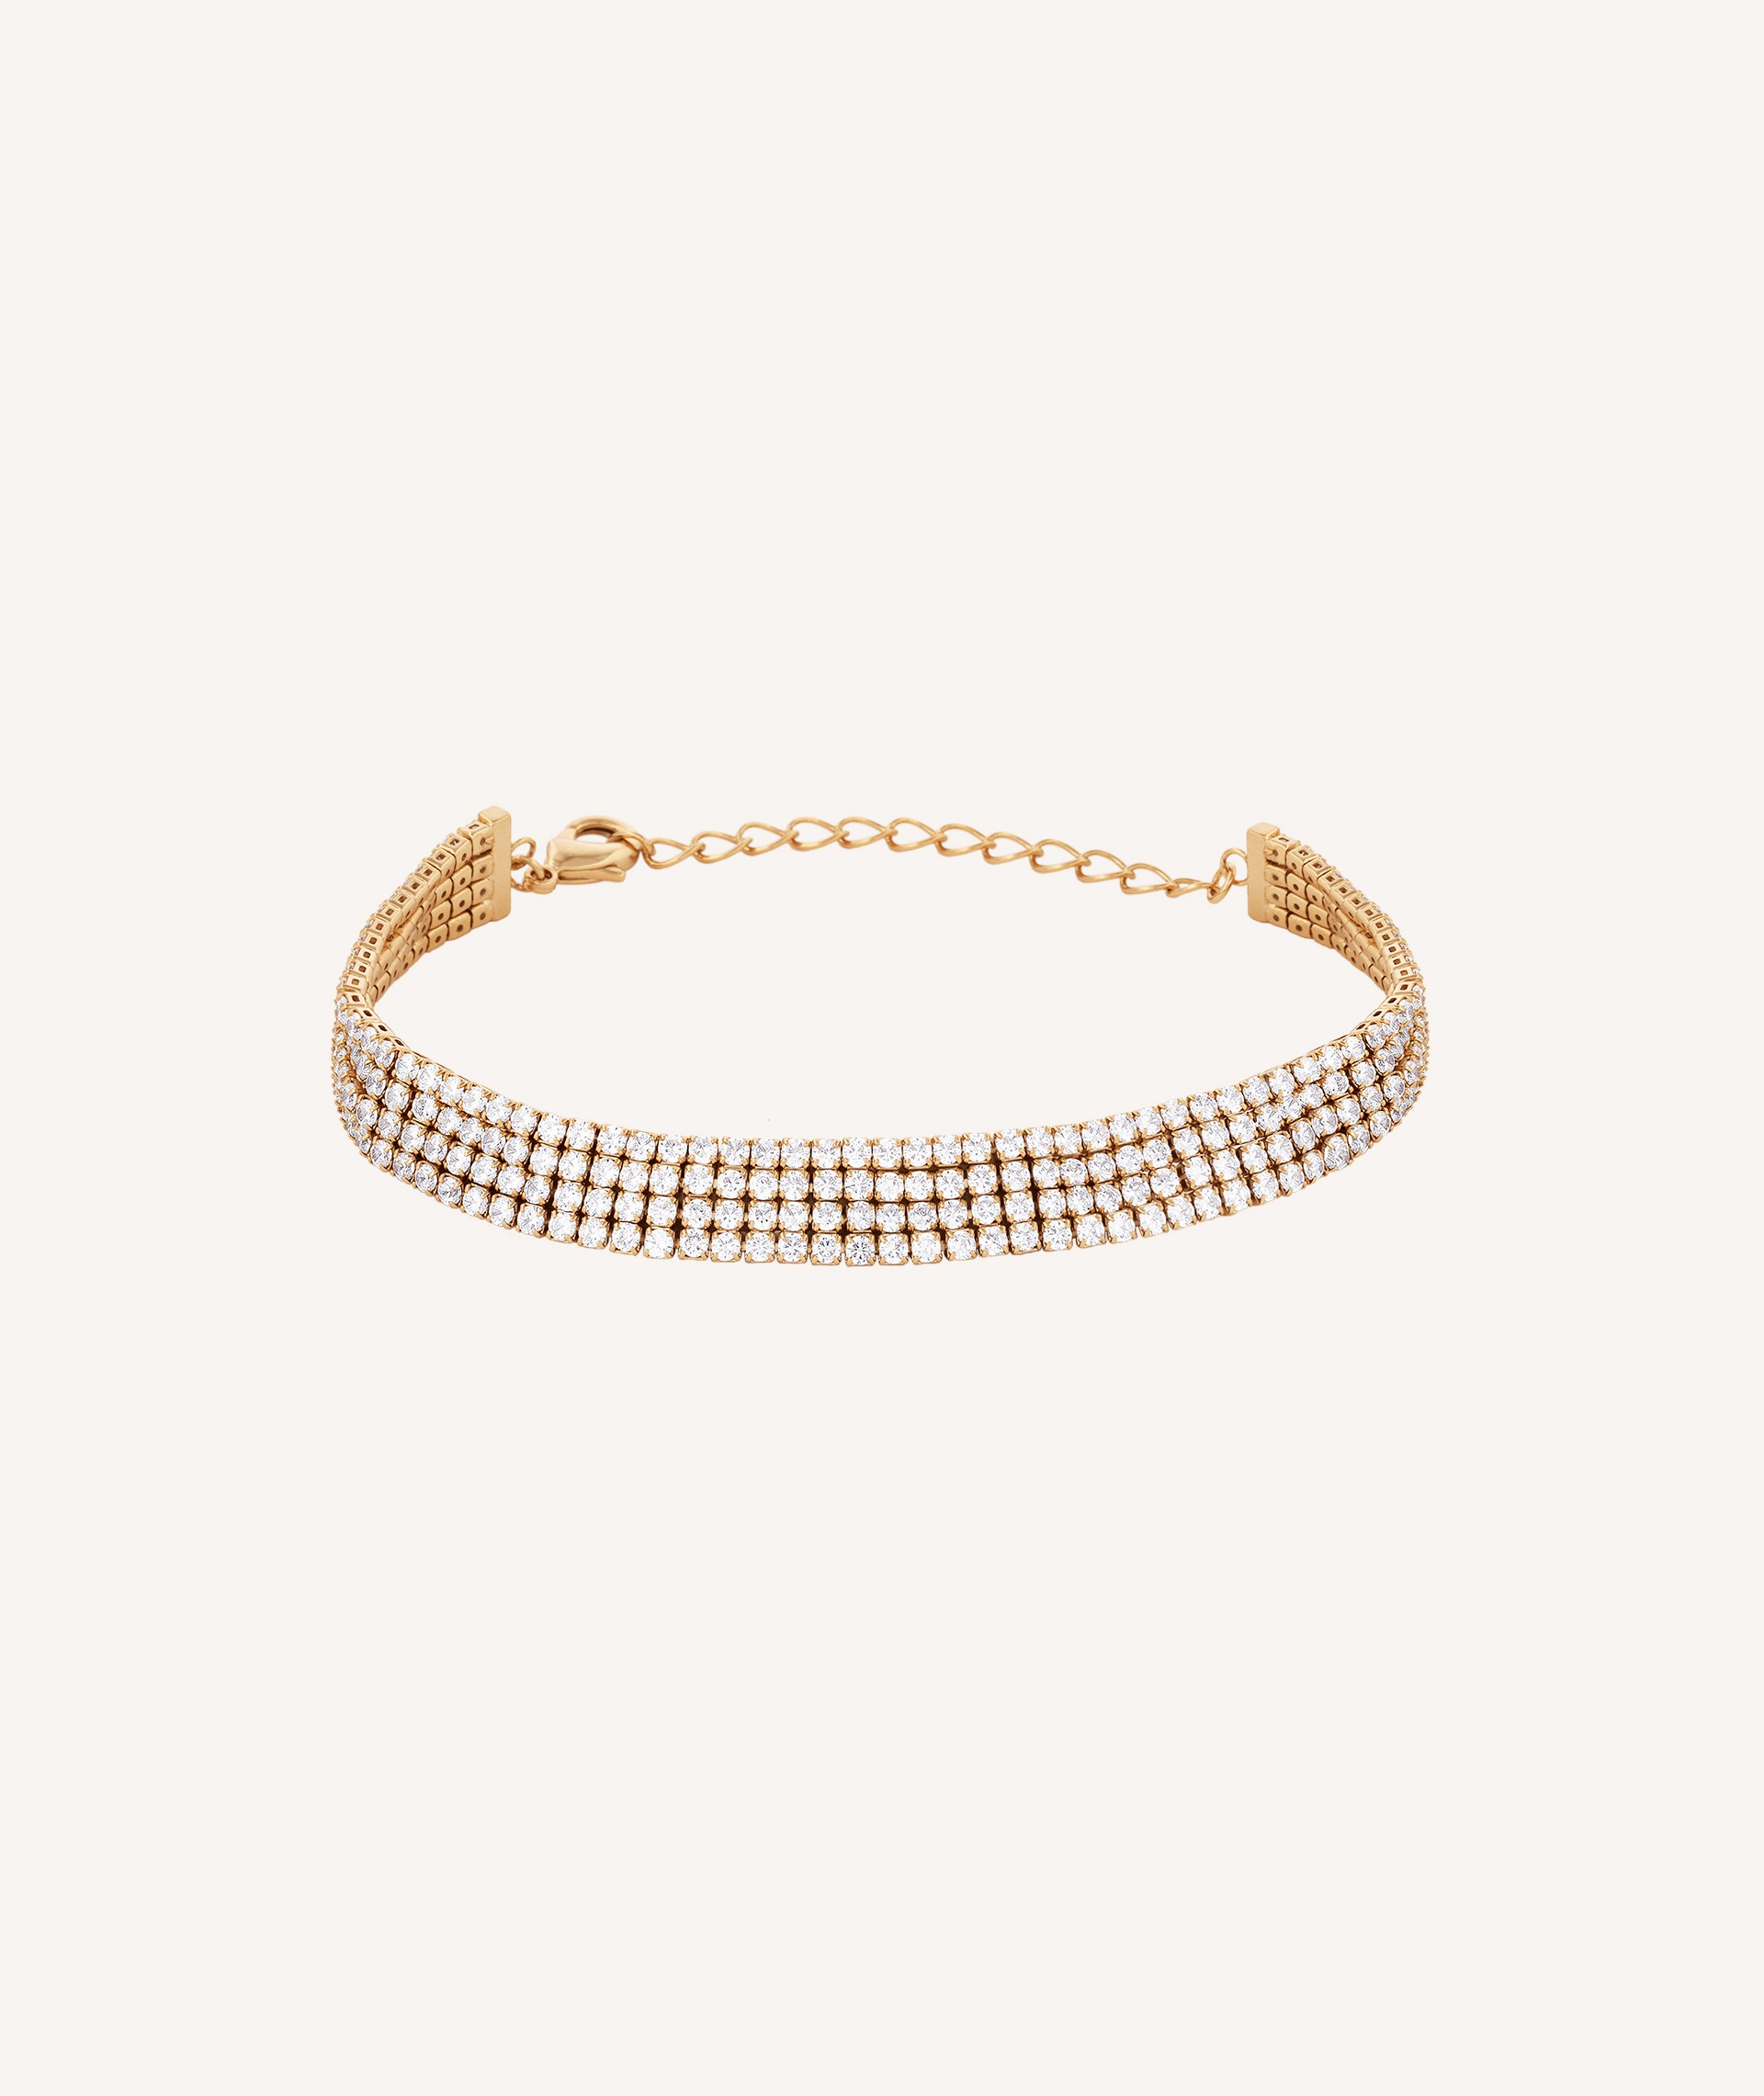 Bracelet Bonnie 18 kt gold plated strips with circumlides